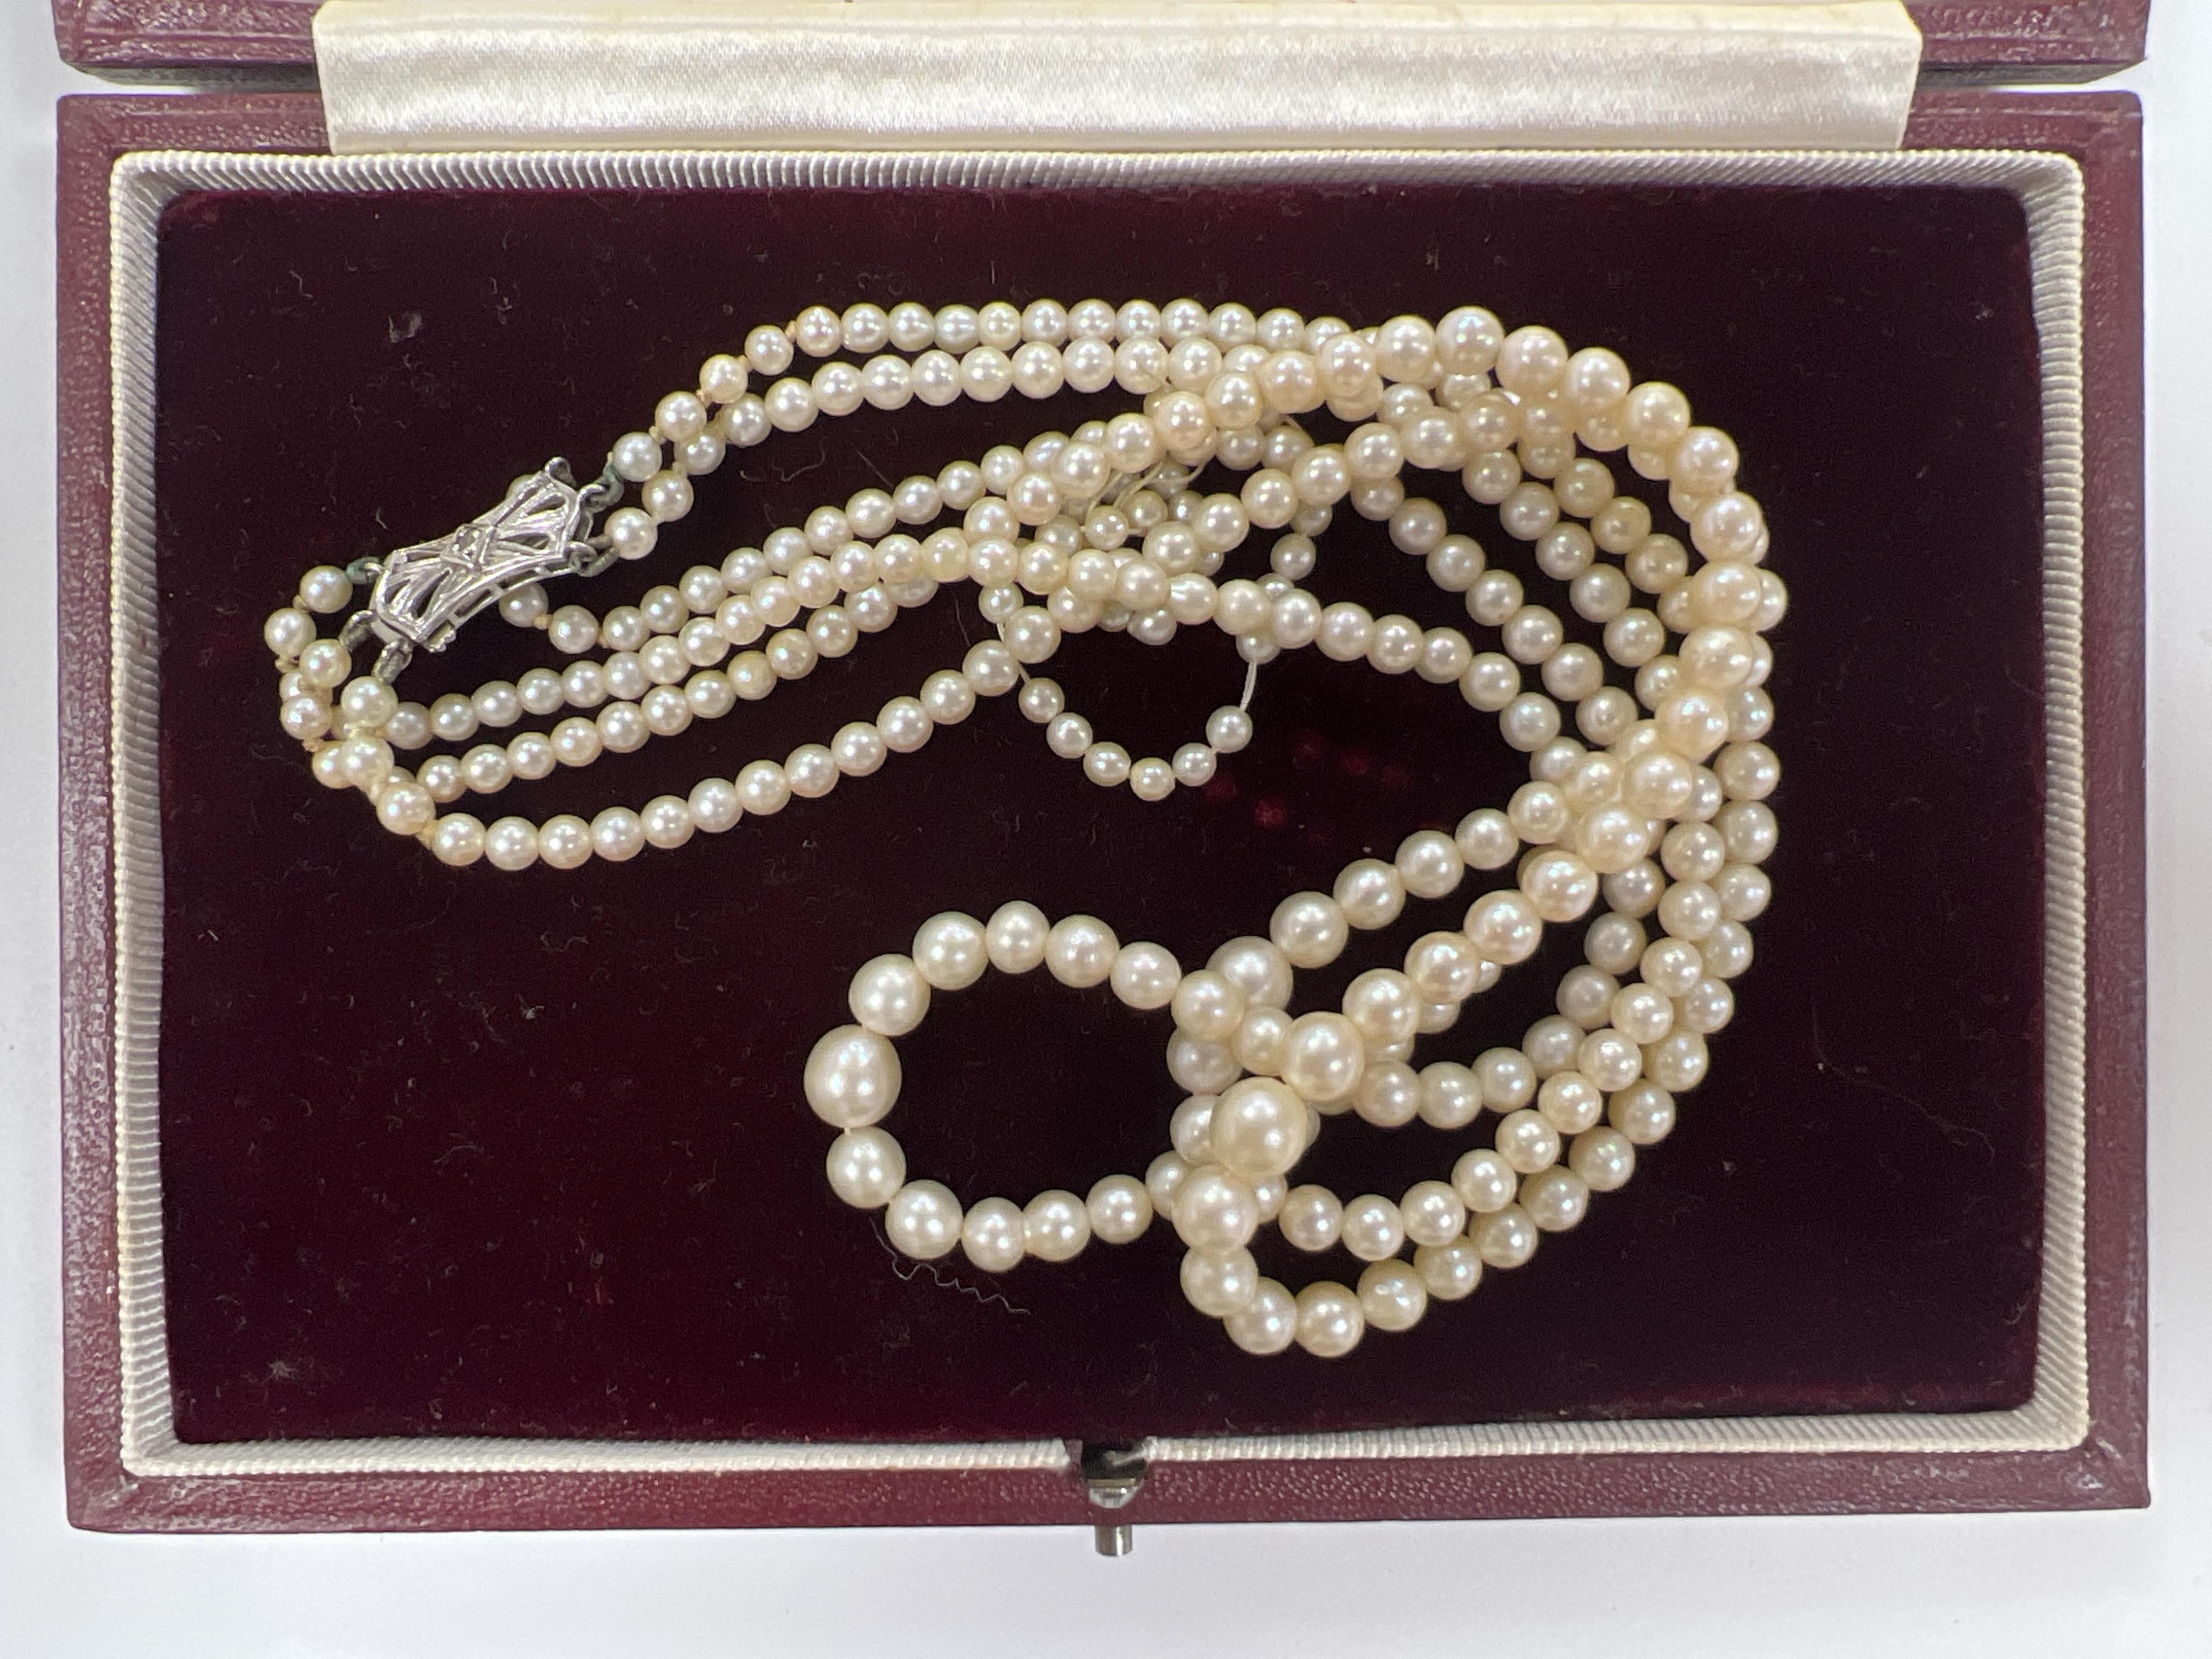 A triple strand graduated cultured pearl choker necklace, with diamond chip set 9ct white gold clasp, 38cm, in a Harrods box, together with some loose beads. Condition - fair